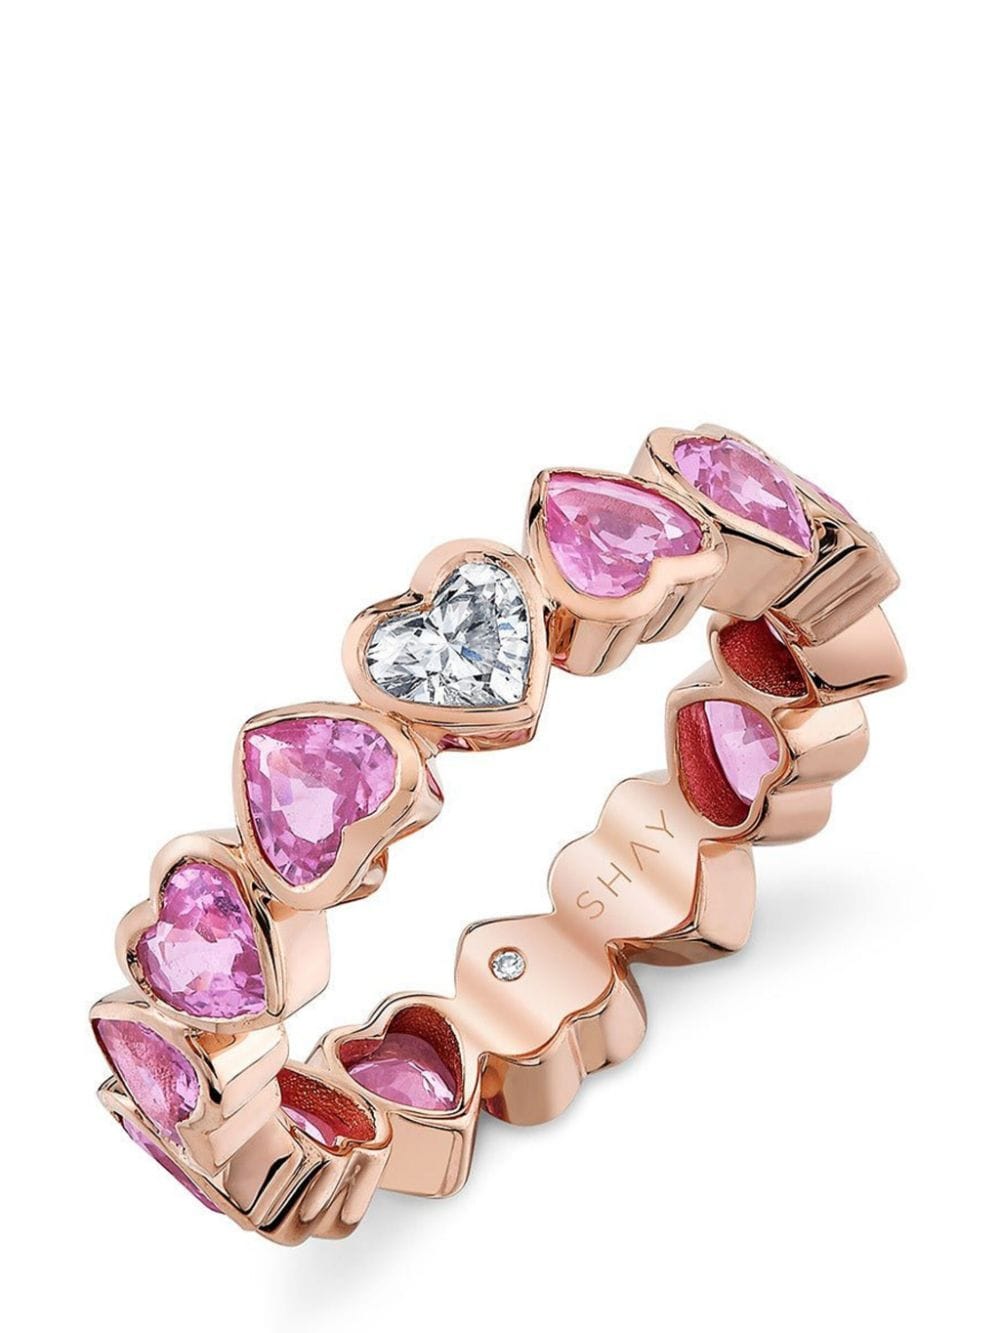 18kt rose gold, pink sapphire and diamond heart ring